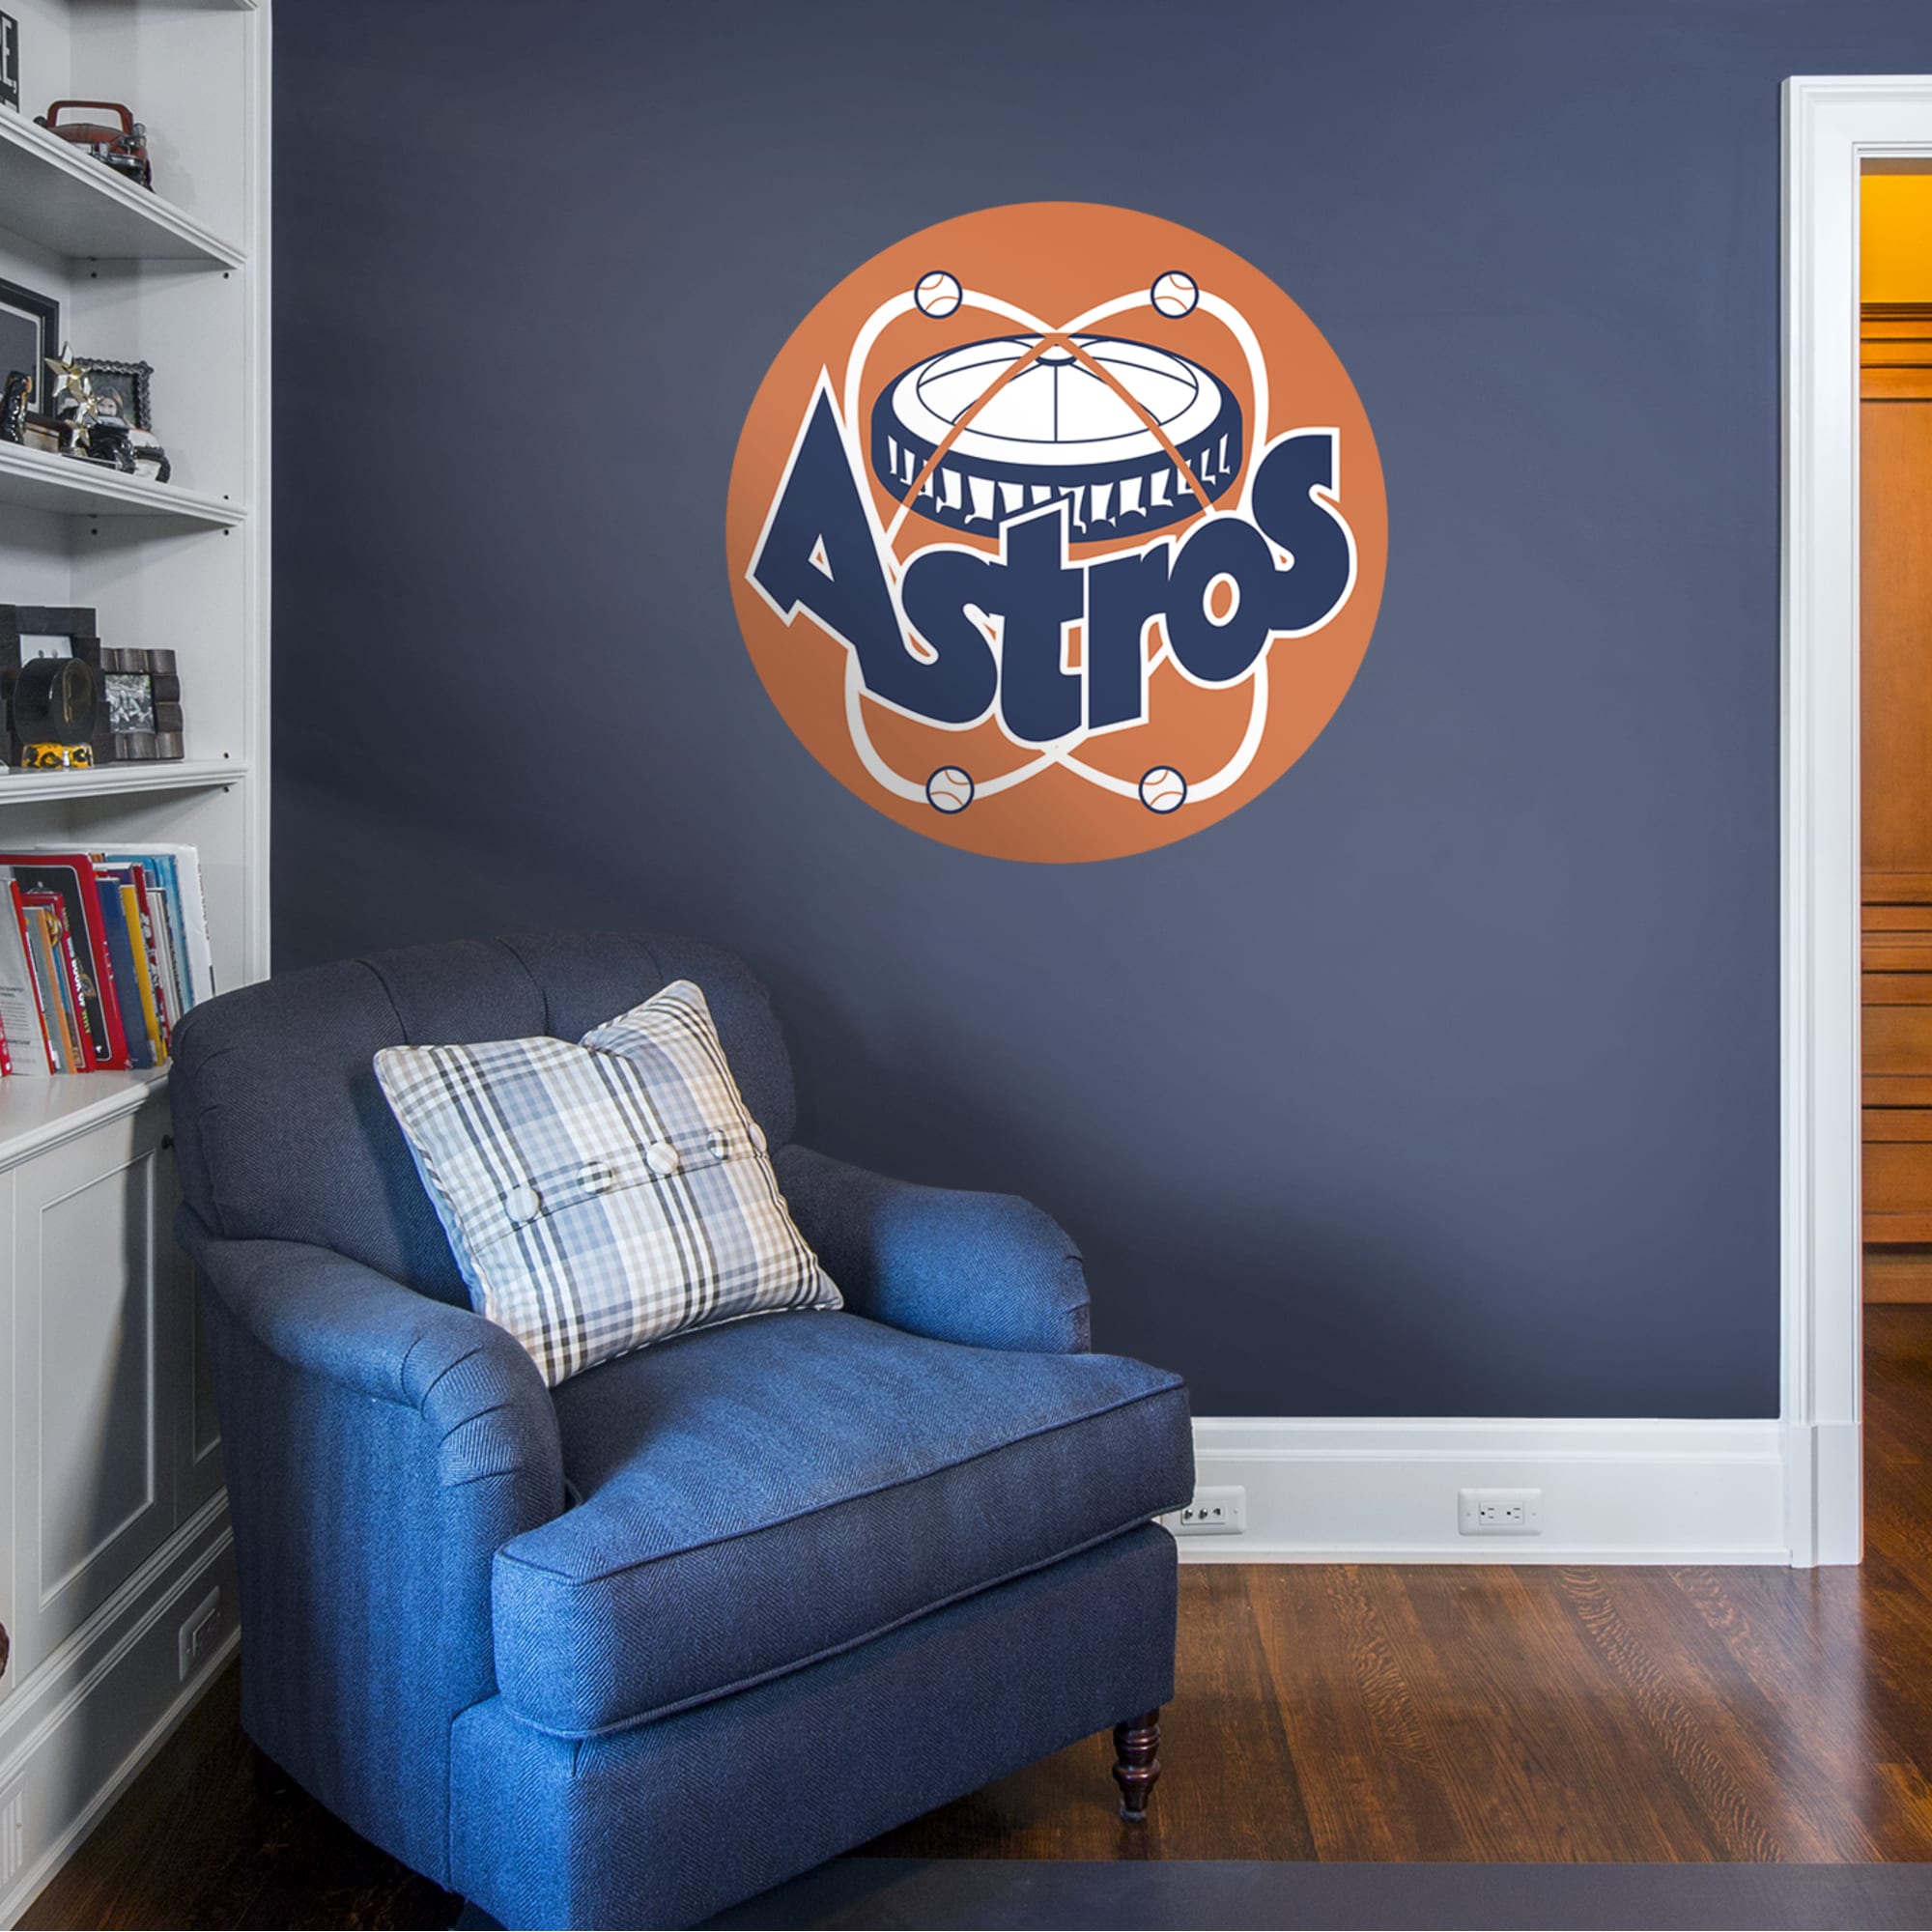 Houston Astros: Classic Logo - Officially Licensed MLB Removable Wall Decal 39.0"W x 39.0"H by Fathead | Vinyl